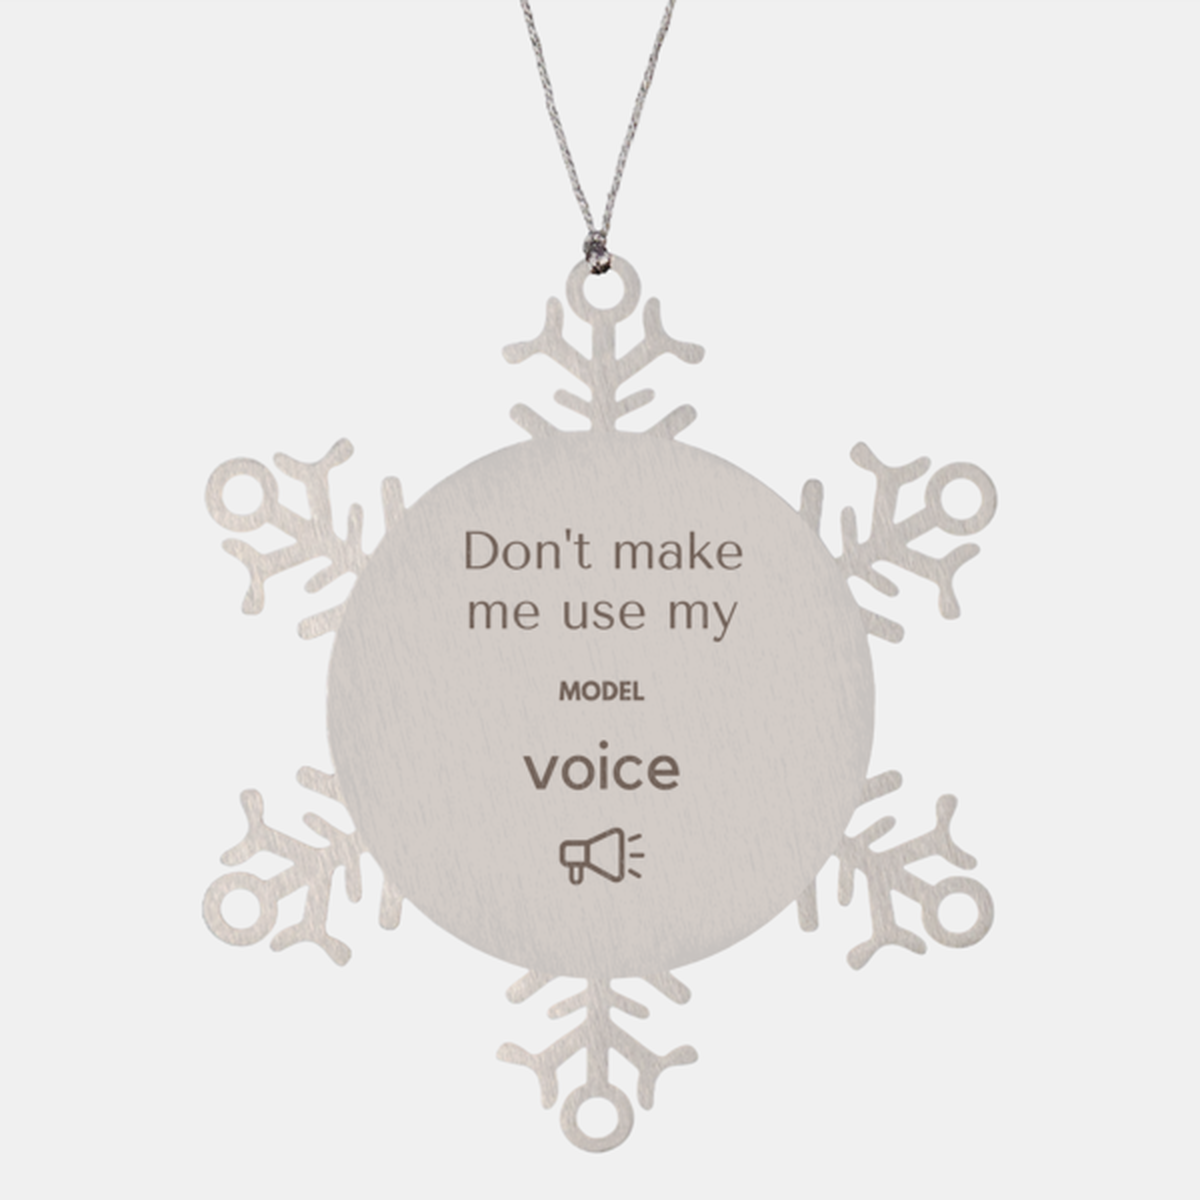 Don't make me use my Model voice, Sarcasm Model Ornament Gifts, Christmas Model Snowflake Ornament Unique Gifts For Model Coworkers, Men, Women, Colleague, Friends